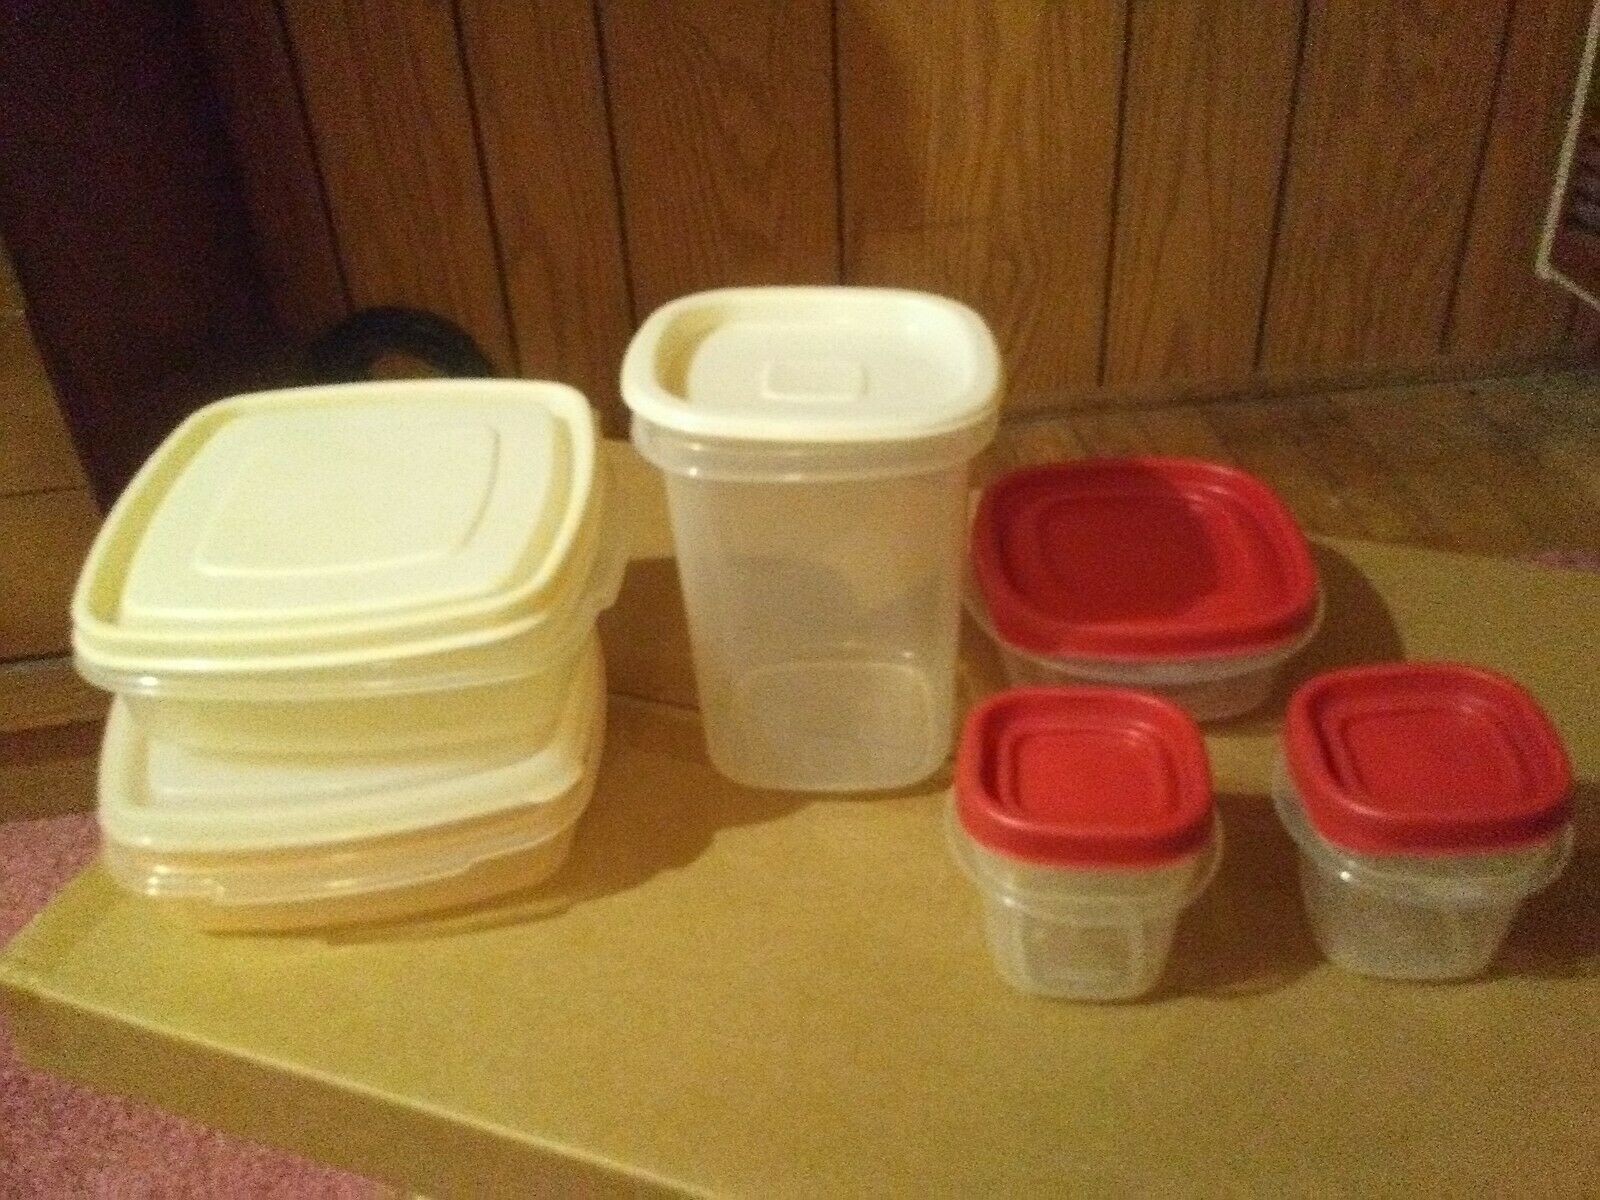 Lot of Rubbermaid containers - $18.99